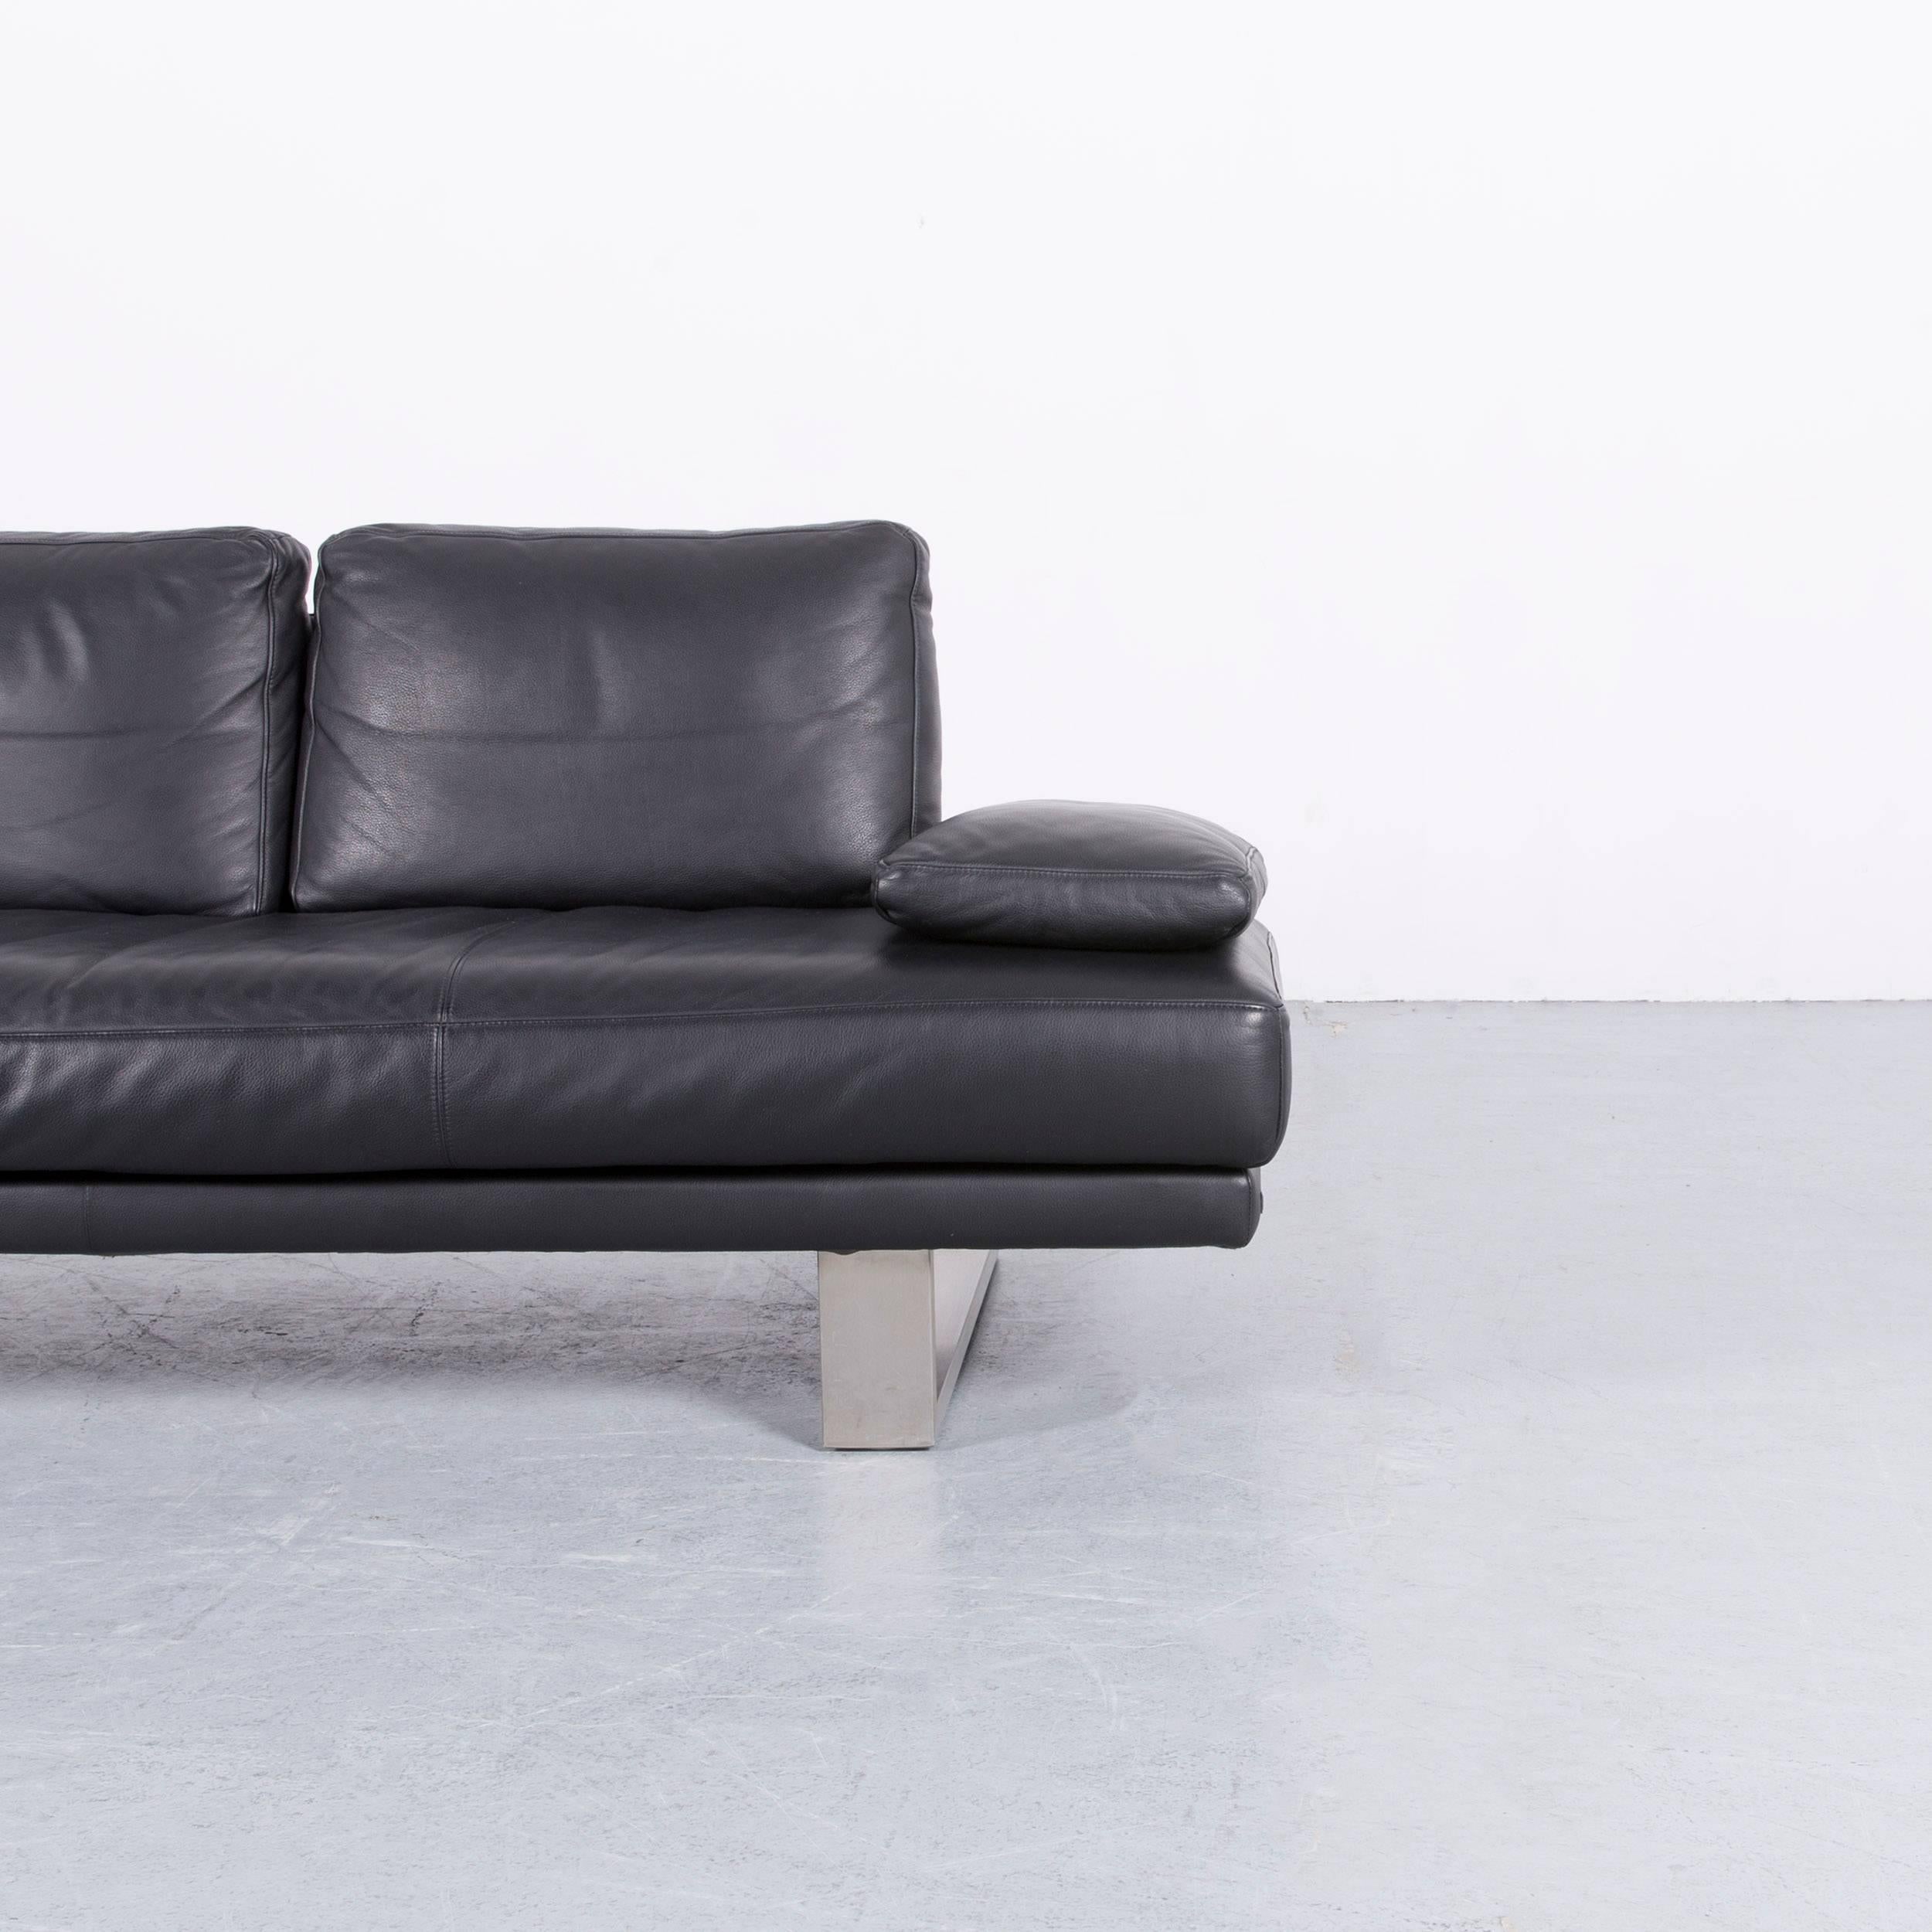 German Rolf Benz 6600 Designer Leather Sofa in Black Two-Seat